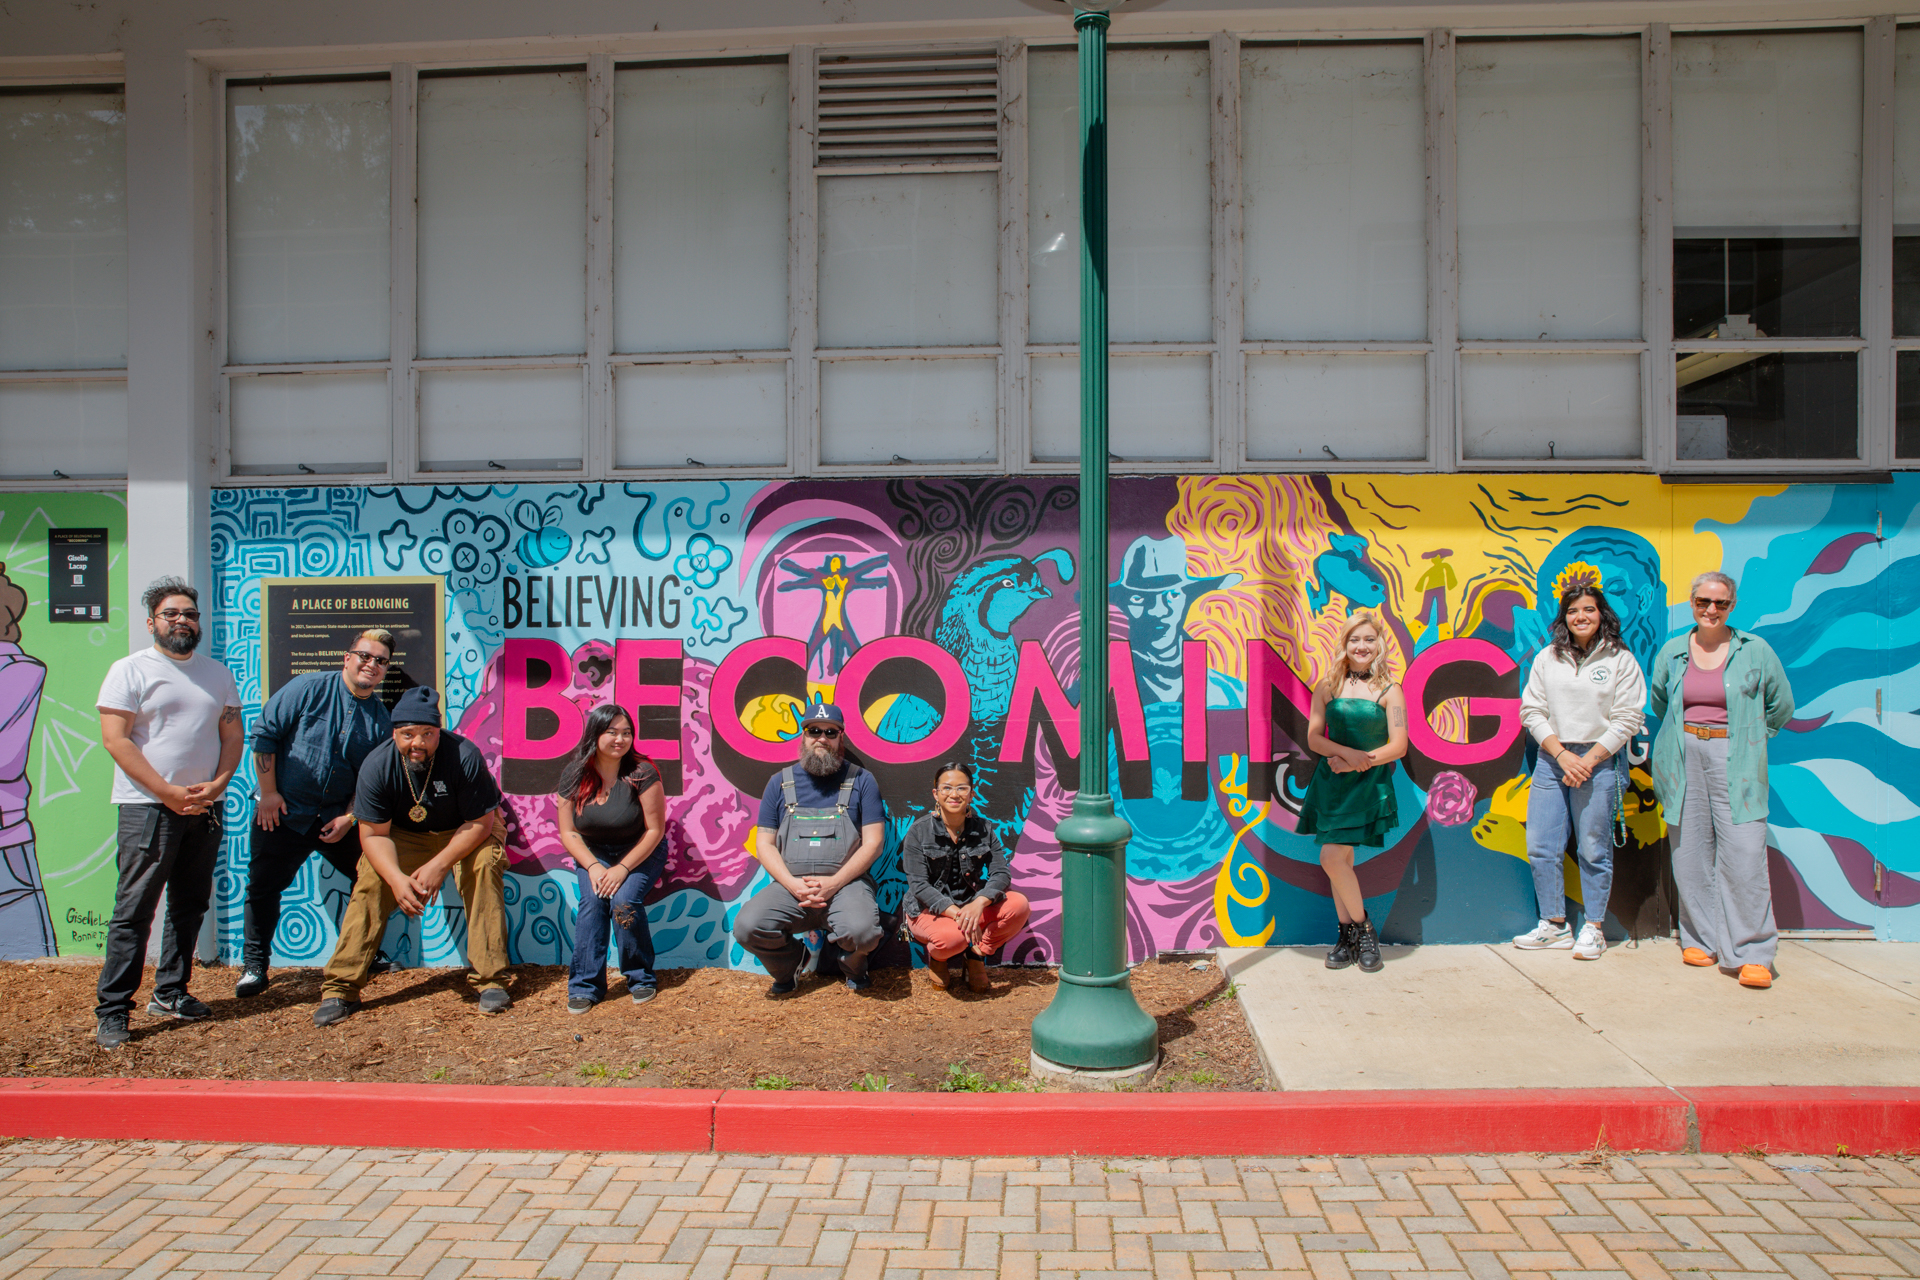 Nine artists pose for a photo, standing outdoors in front of the "Becoming" mural.